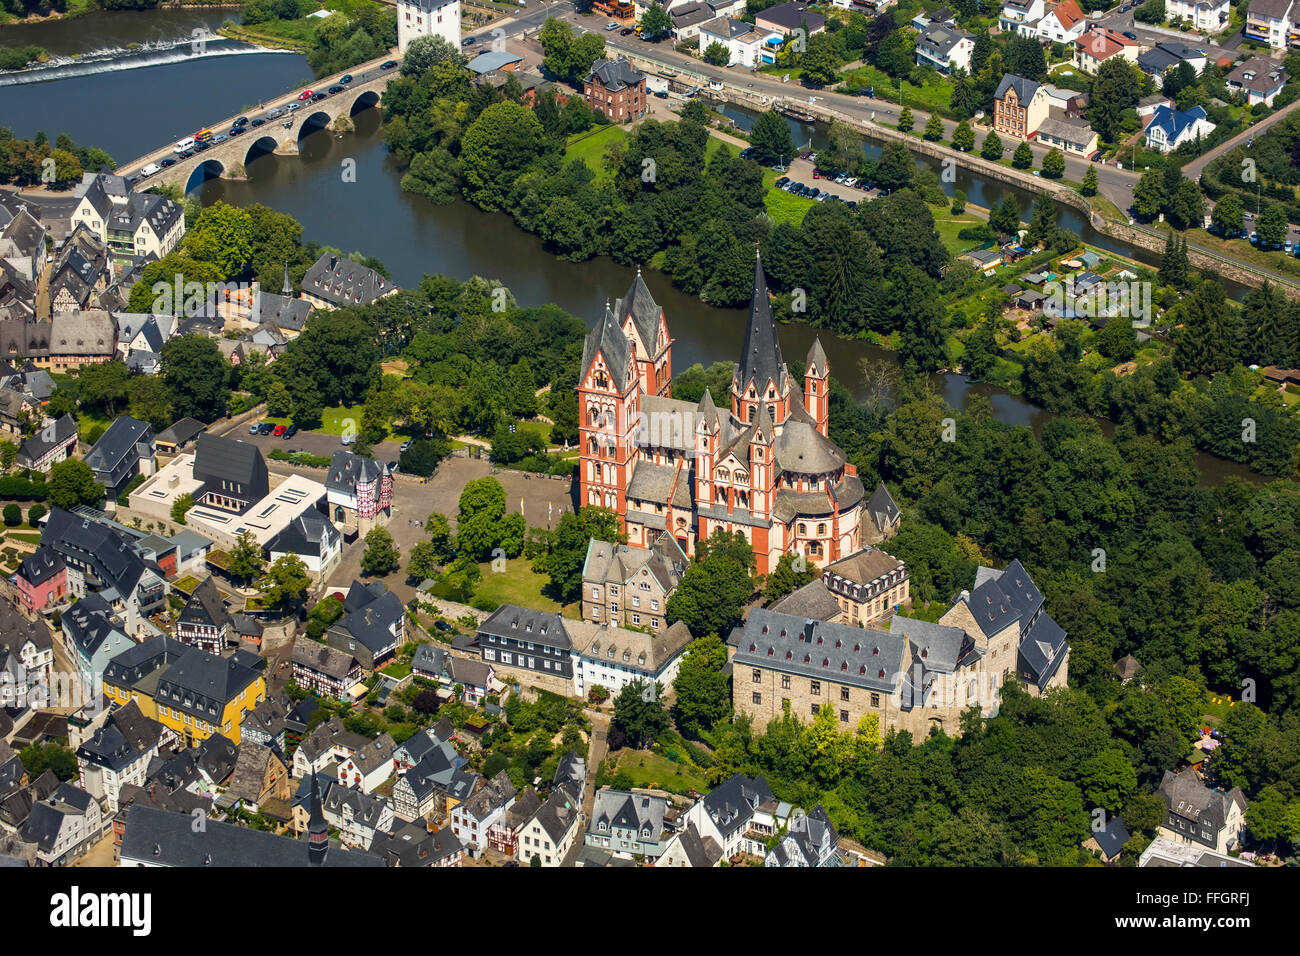 Aerial view, Limburger chateau, overlooking the old town of Limburg on the Limburg Cathedral, seen the magnificent building Stock Photo